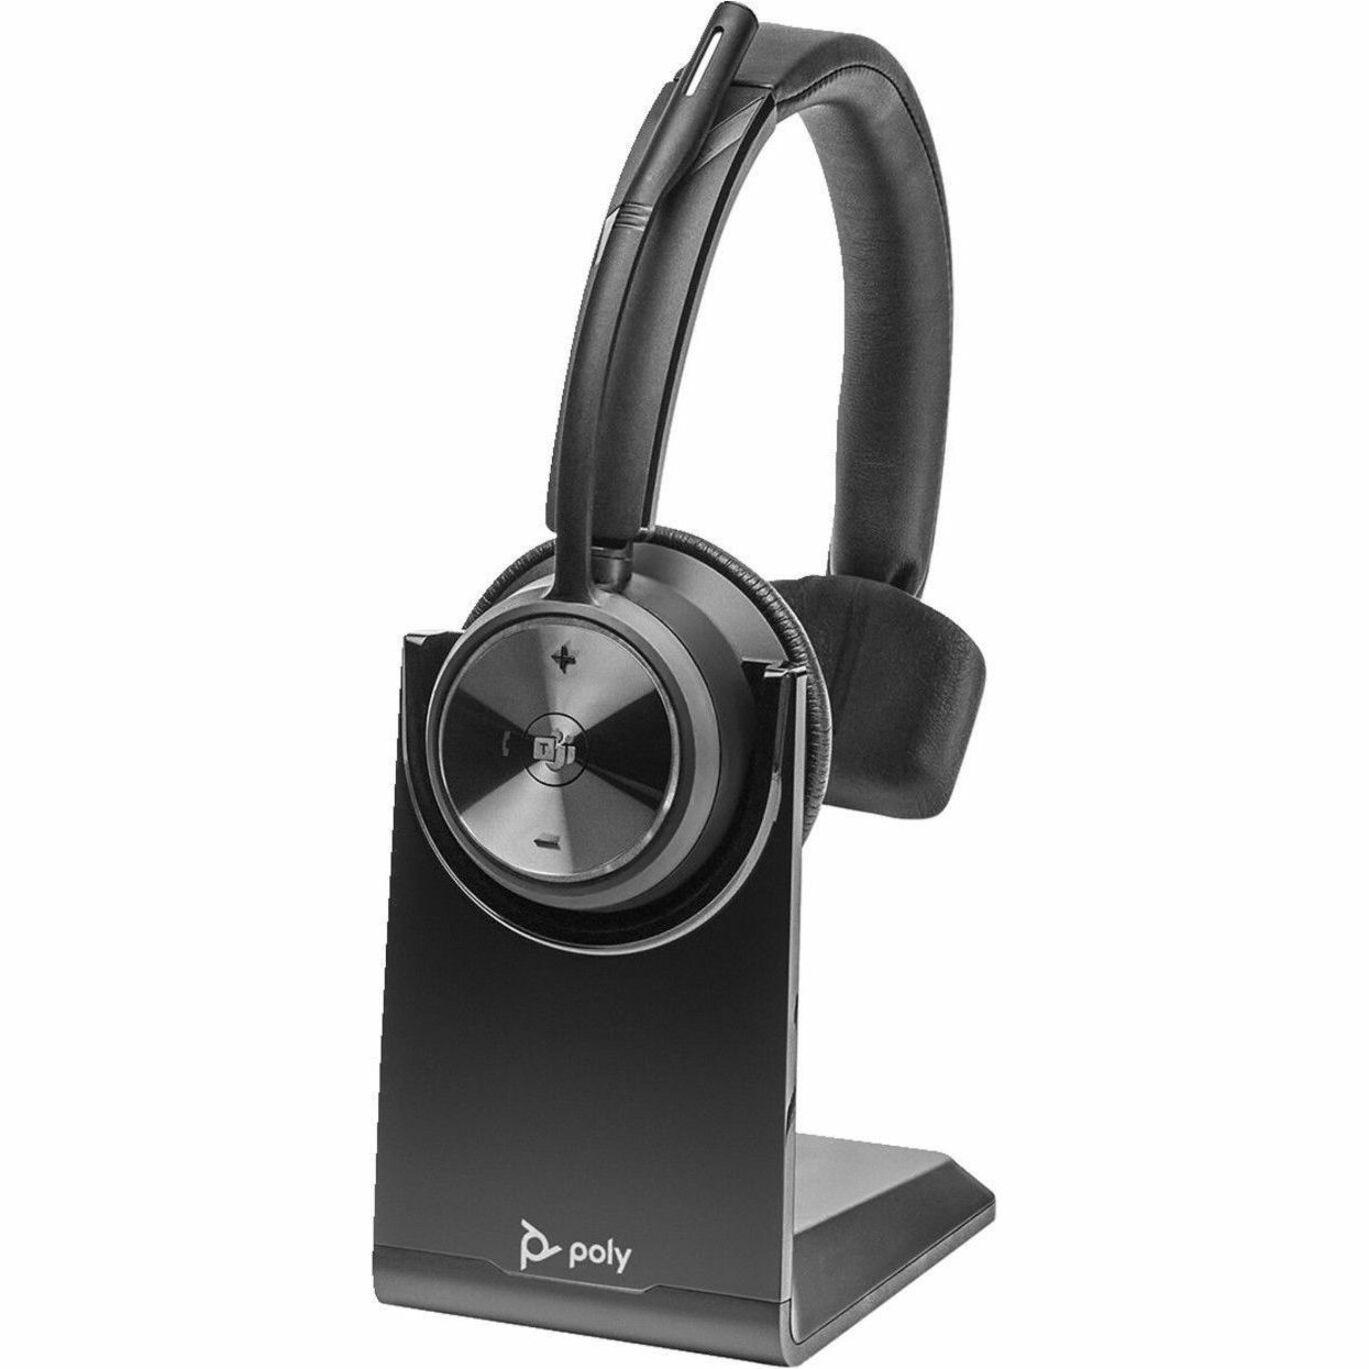 Poly D400 Headset Adapter, for Headset